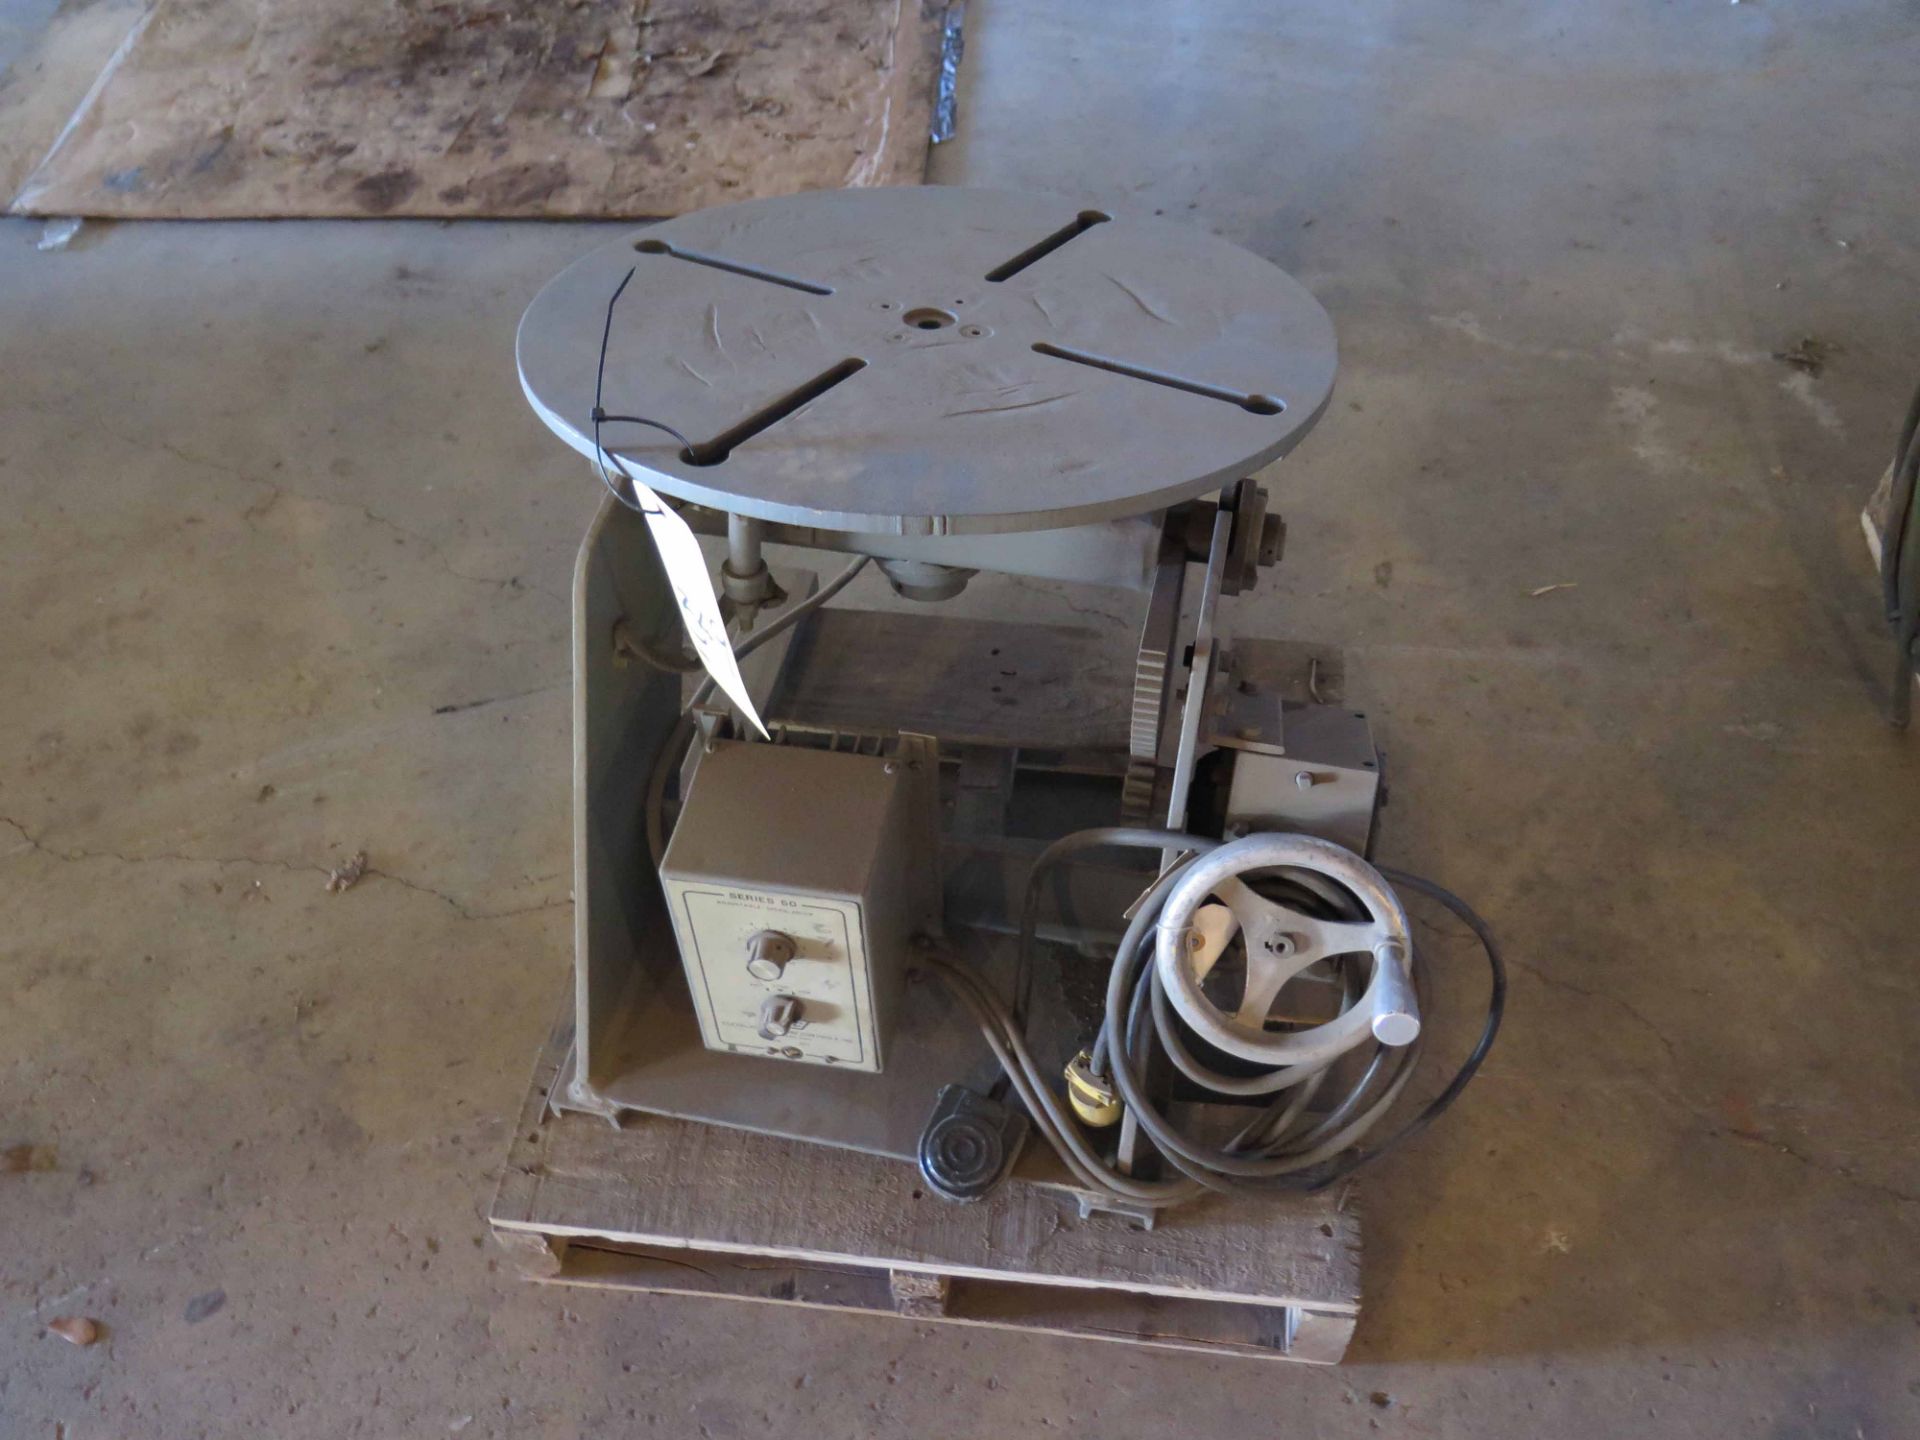 WELDING POSITIONER, RANSOME 300 LB. CAP., Series 50, 20" table